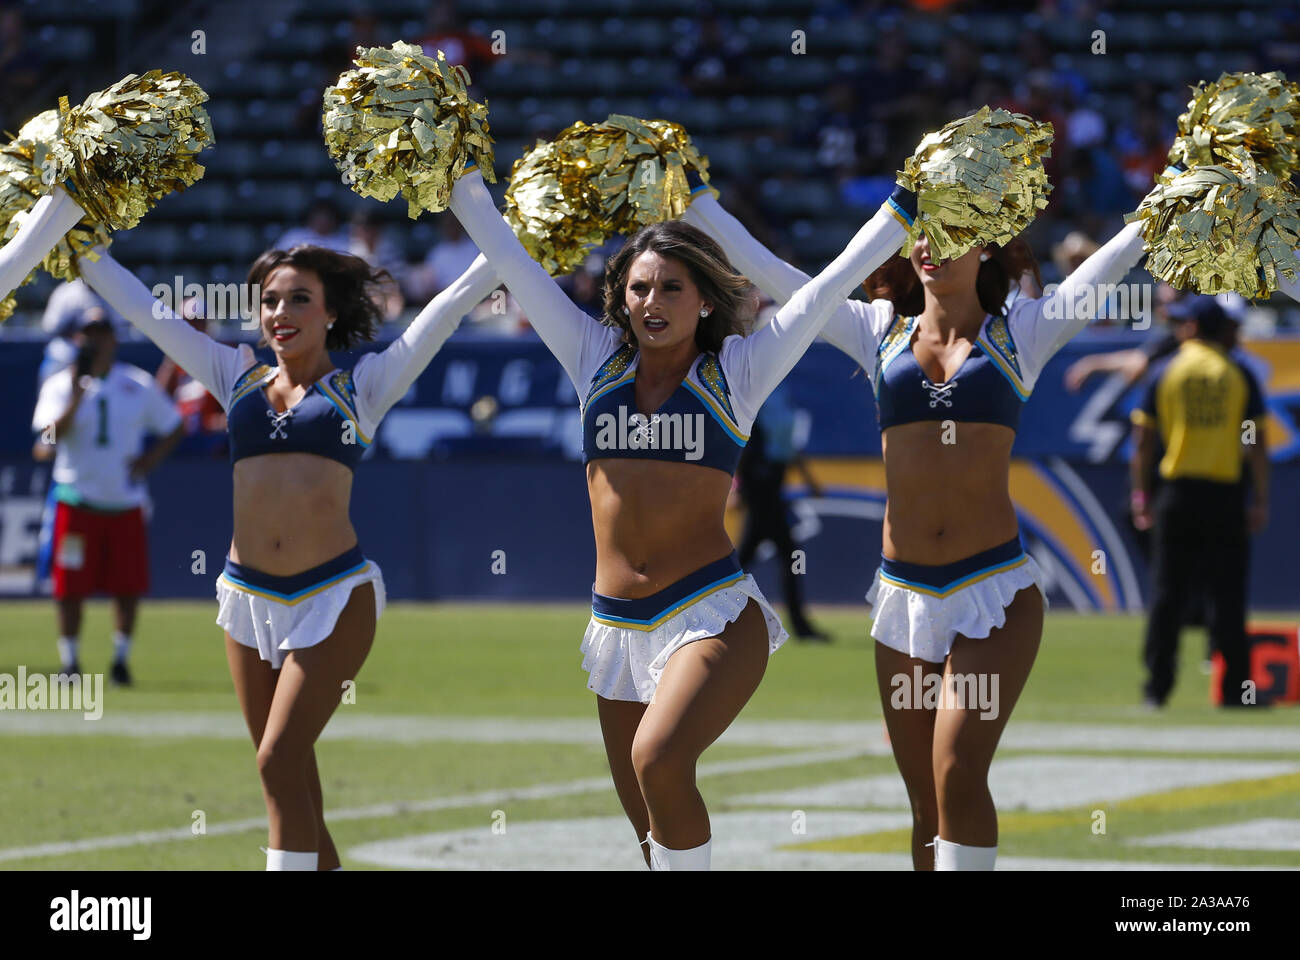 Los Angeles, California, USA. 6th Oct, 2019. Los Angeles Chargers cheerleaders perform during an NFL football game between Los Angeles Chargers and Denver Broncos, Sunday, Oct. 6, 2019, in Carson, Calif. Credit: Ringo Chiu/ZUMA Wire/Alamy Live News Stock Photo